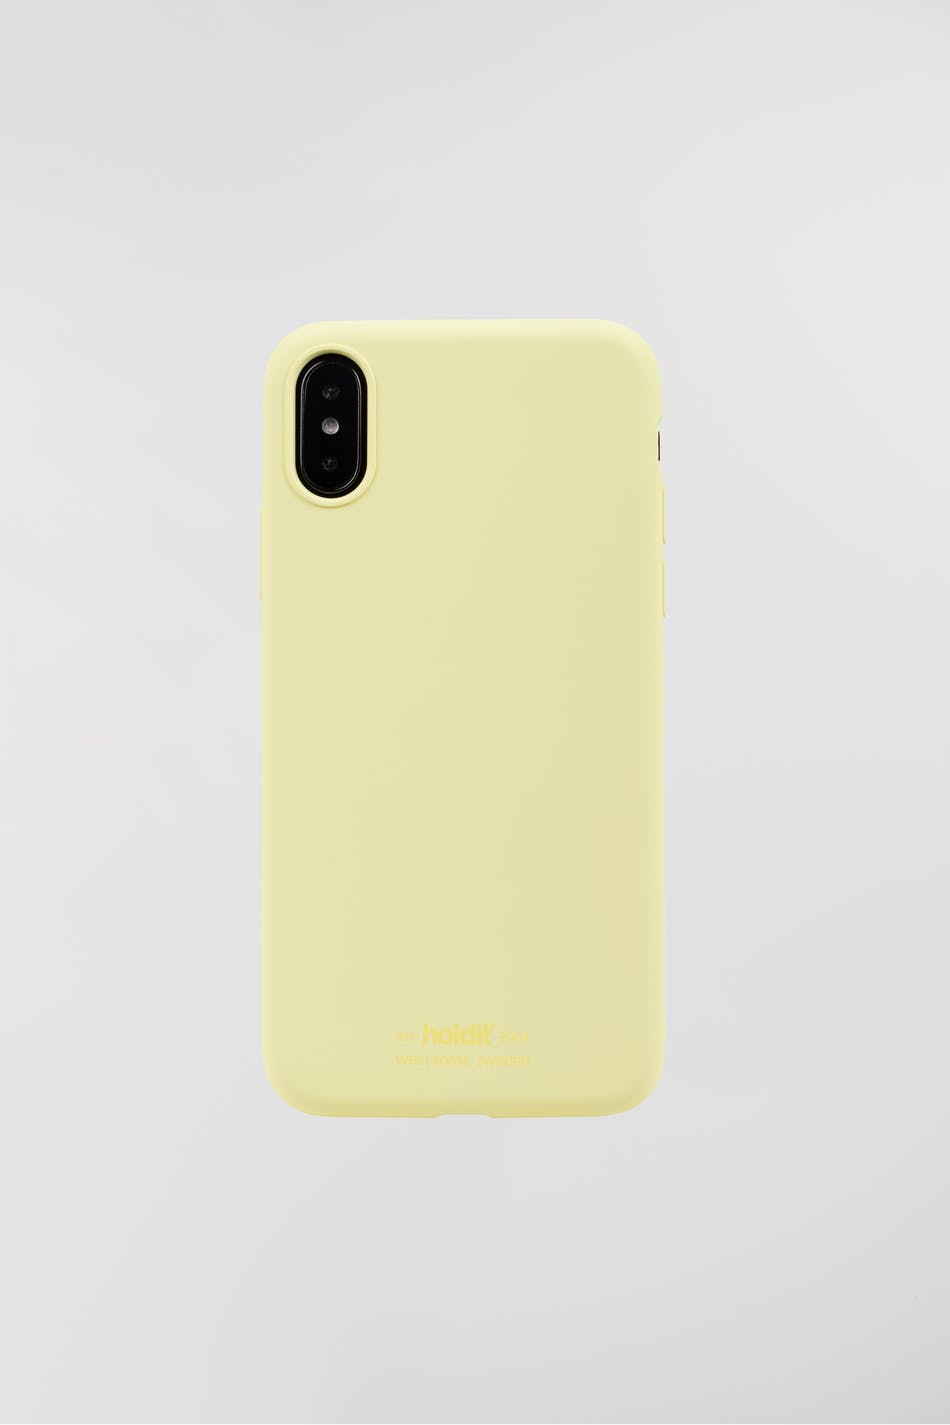 Holdit iphone X/XS silicone case